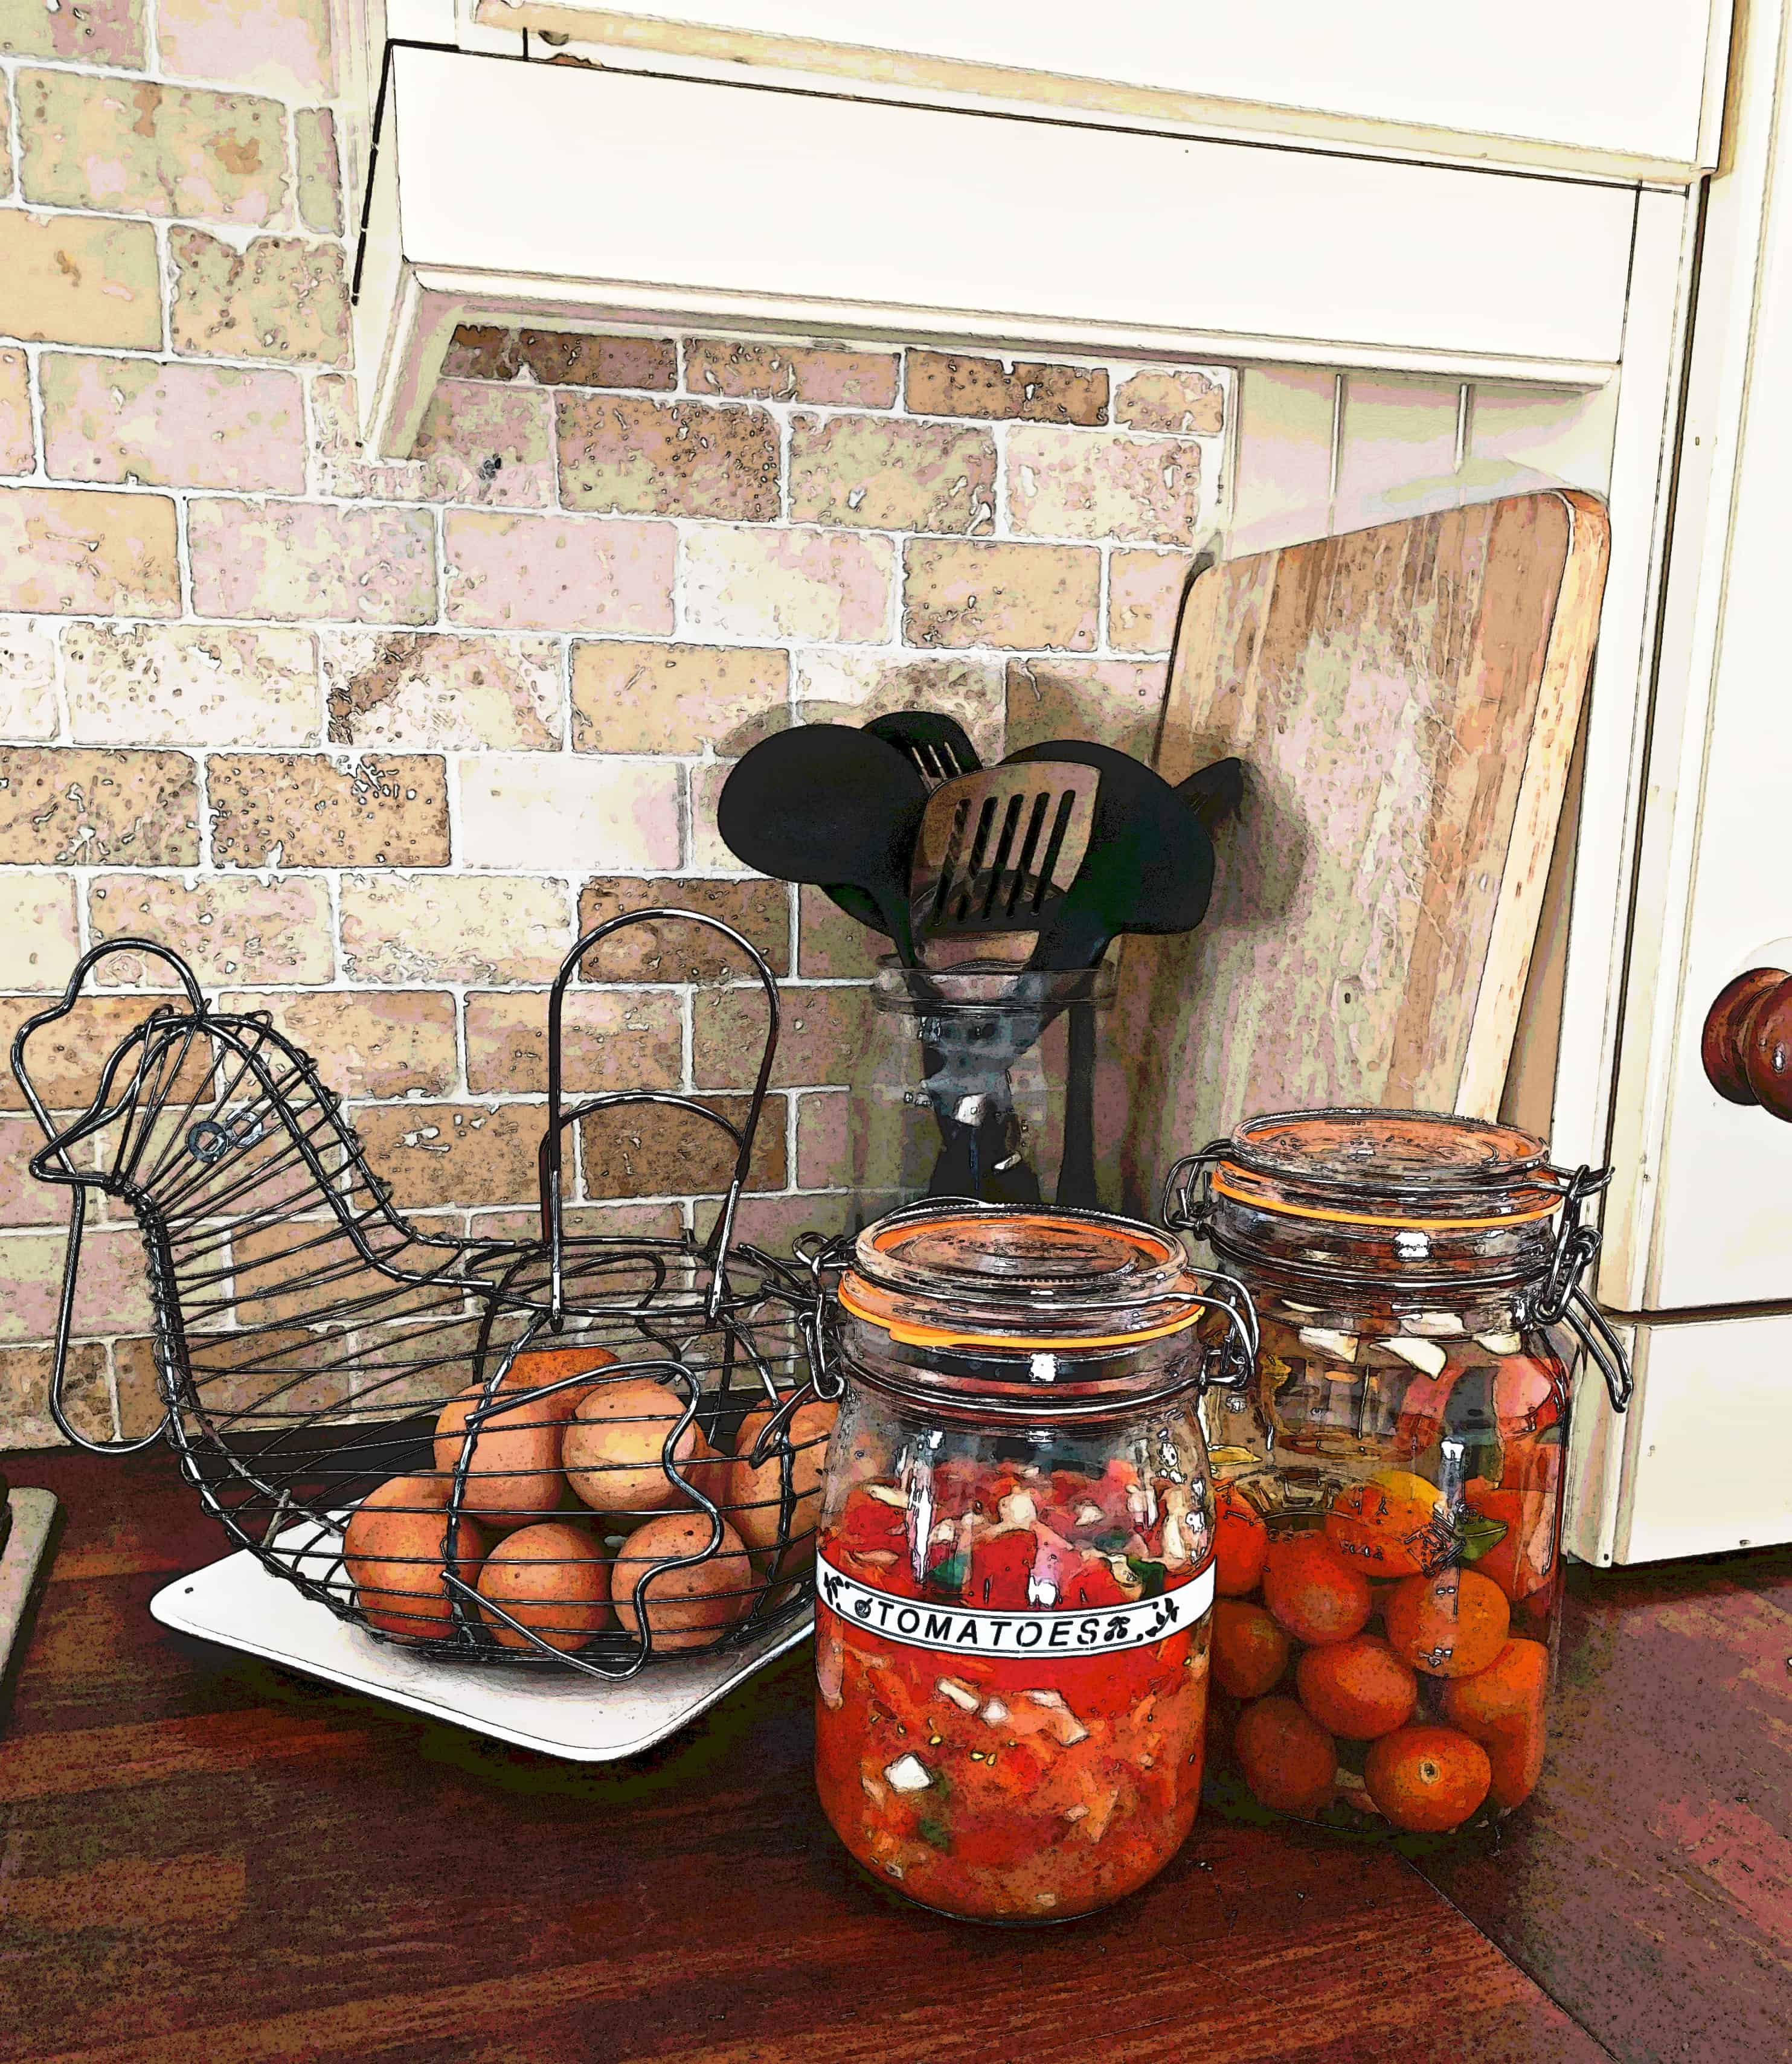 FERMENTED TOMATOES AND SALSA RECIPES. Two easy recipes to get you started with fermented foods for gut health. Full recipes here.